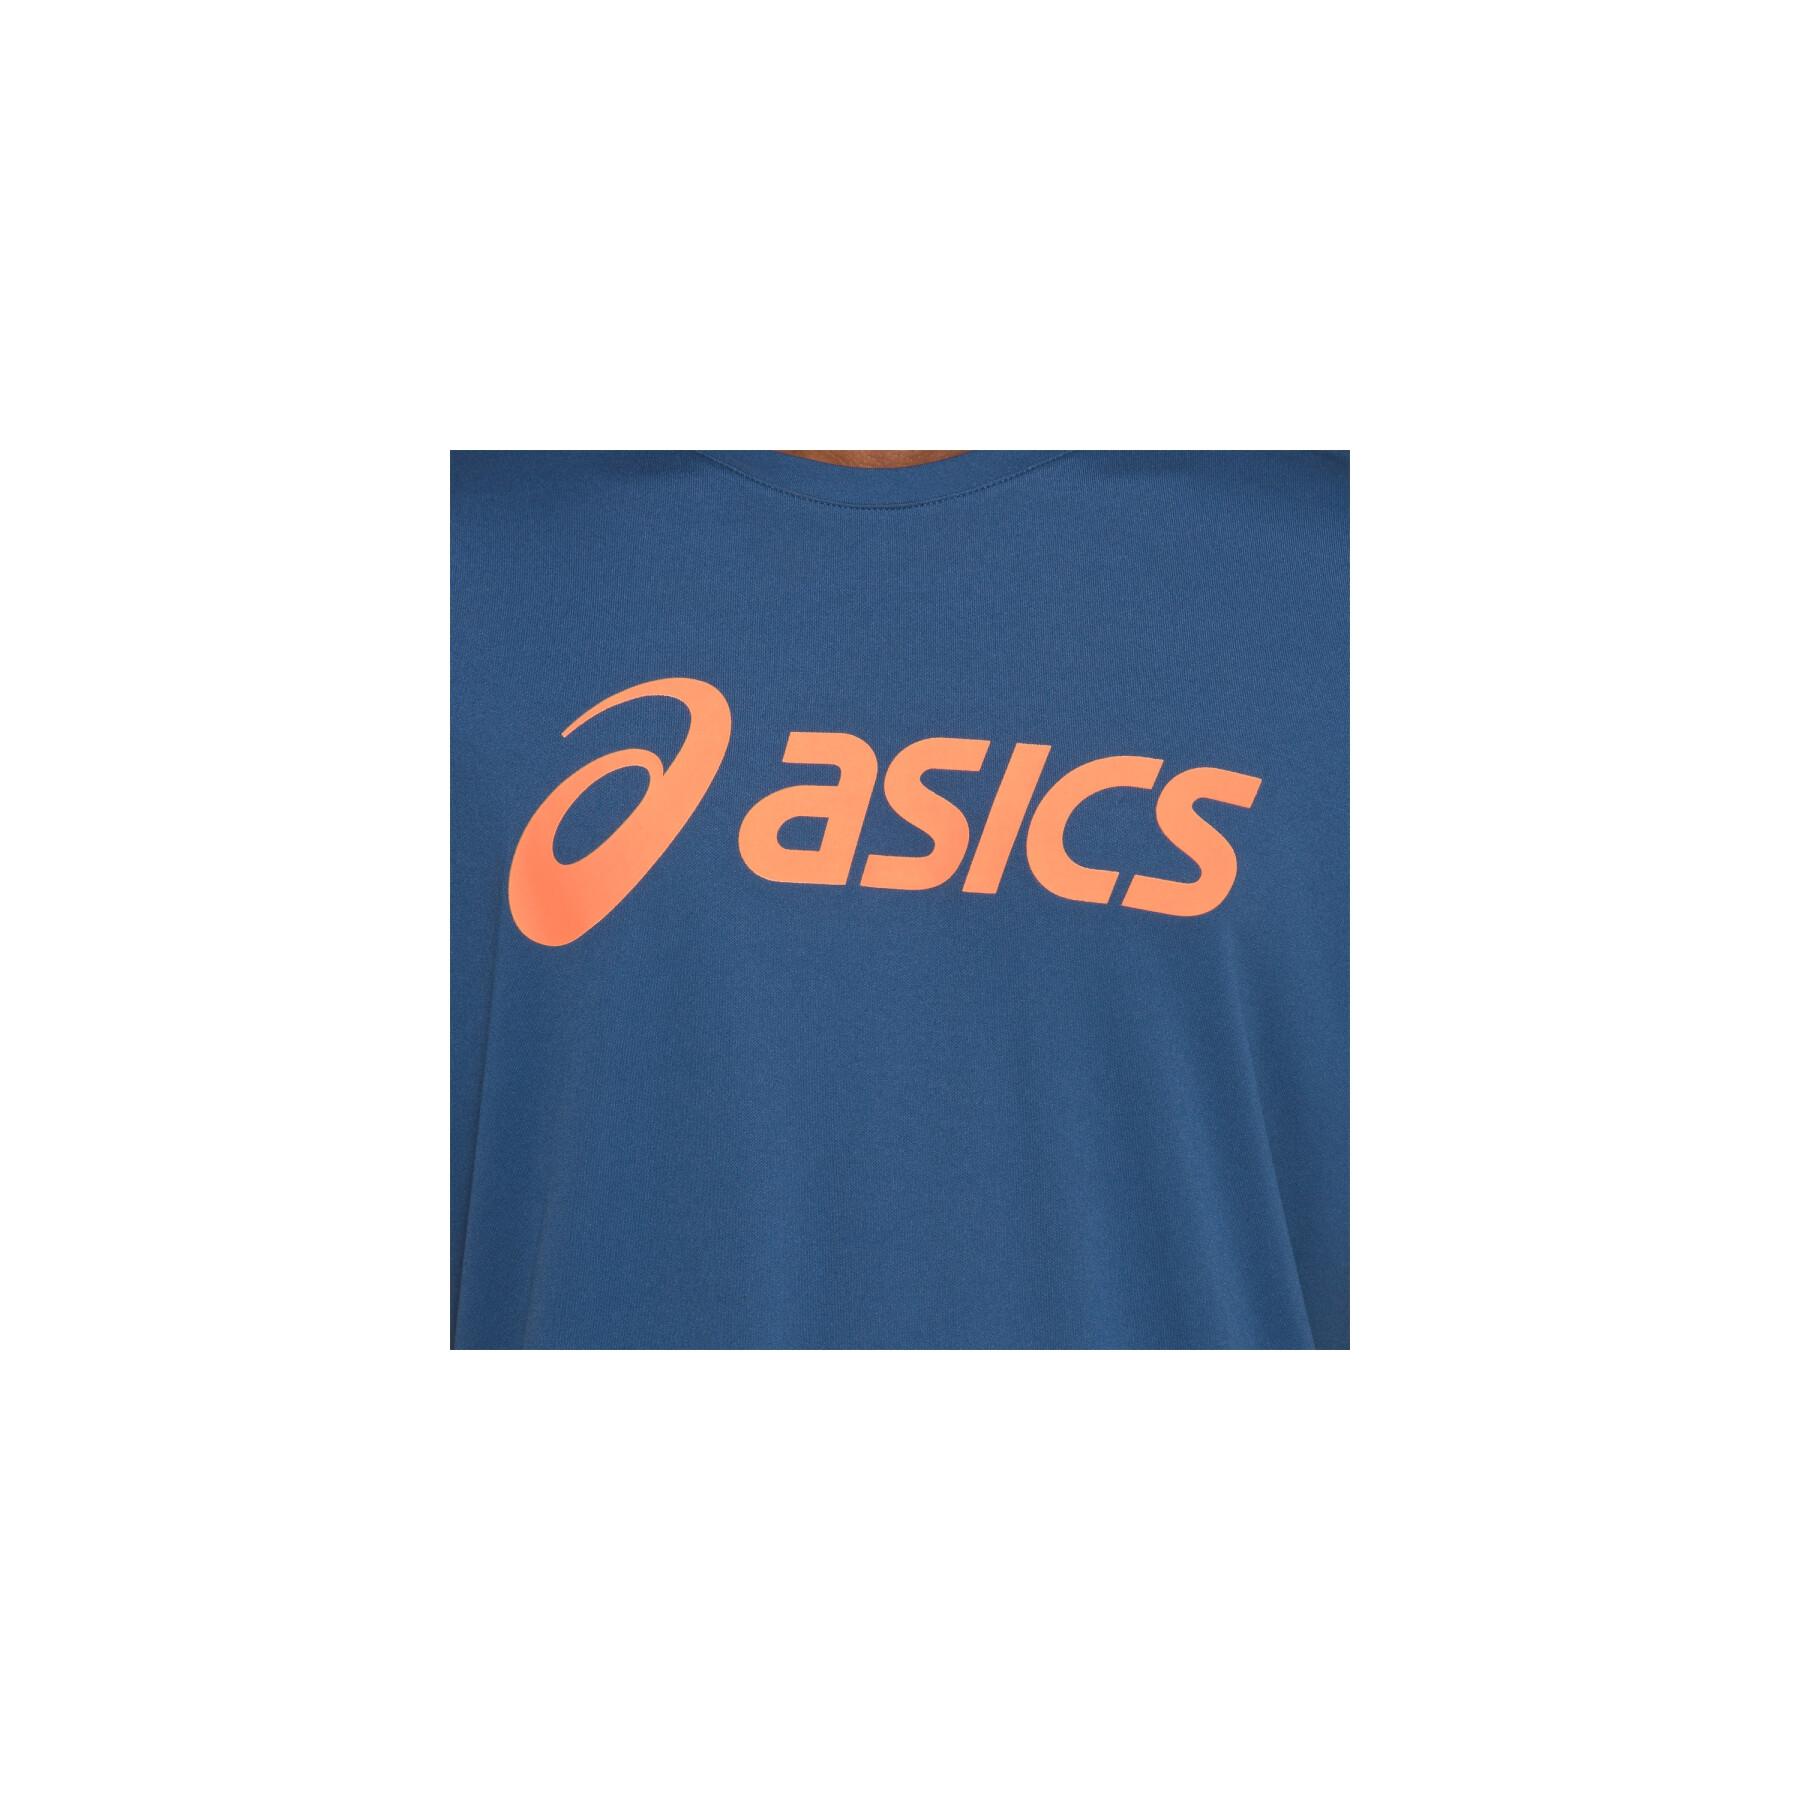 Jersey Asics Silver top